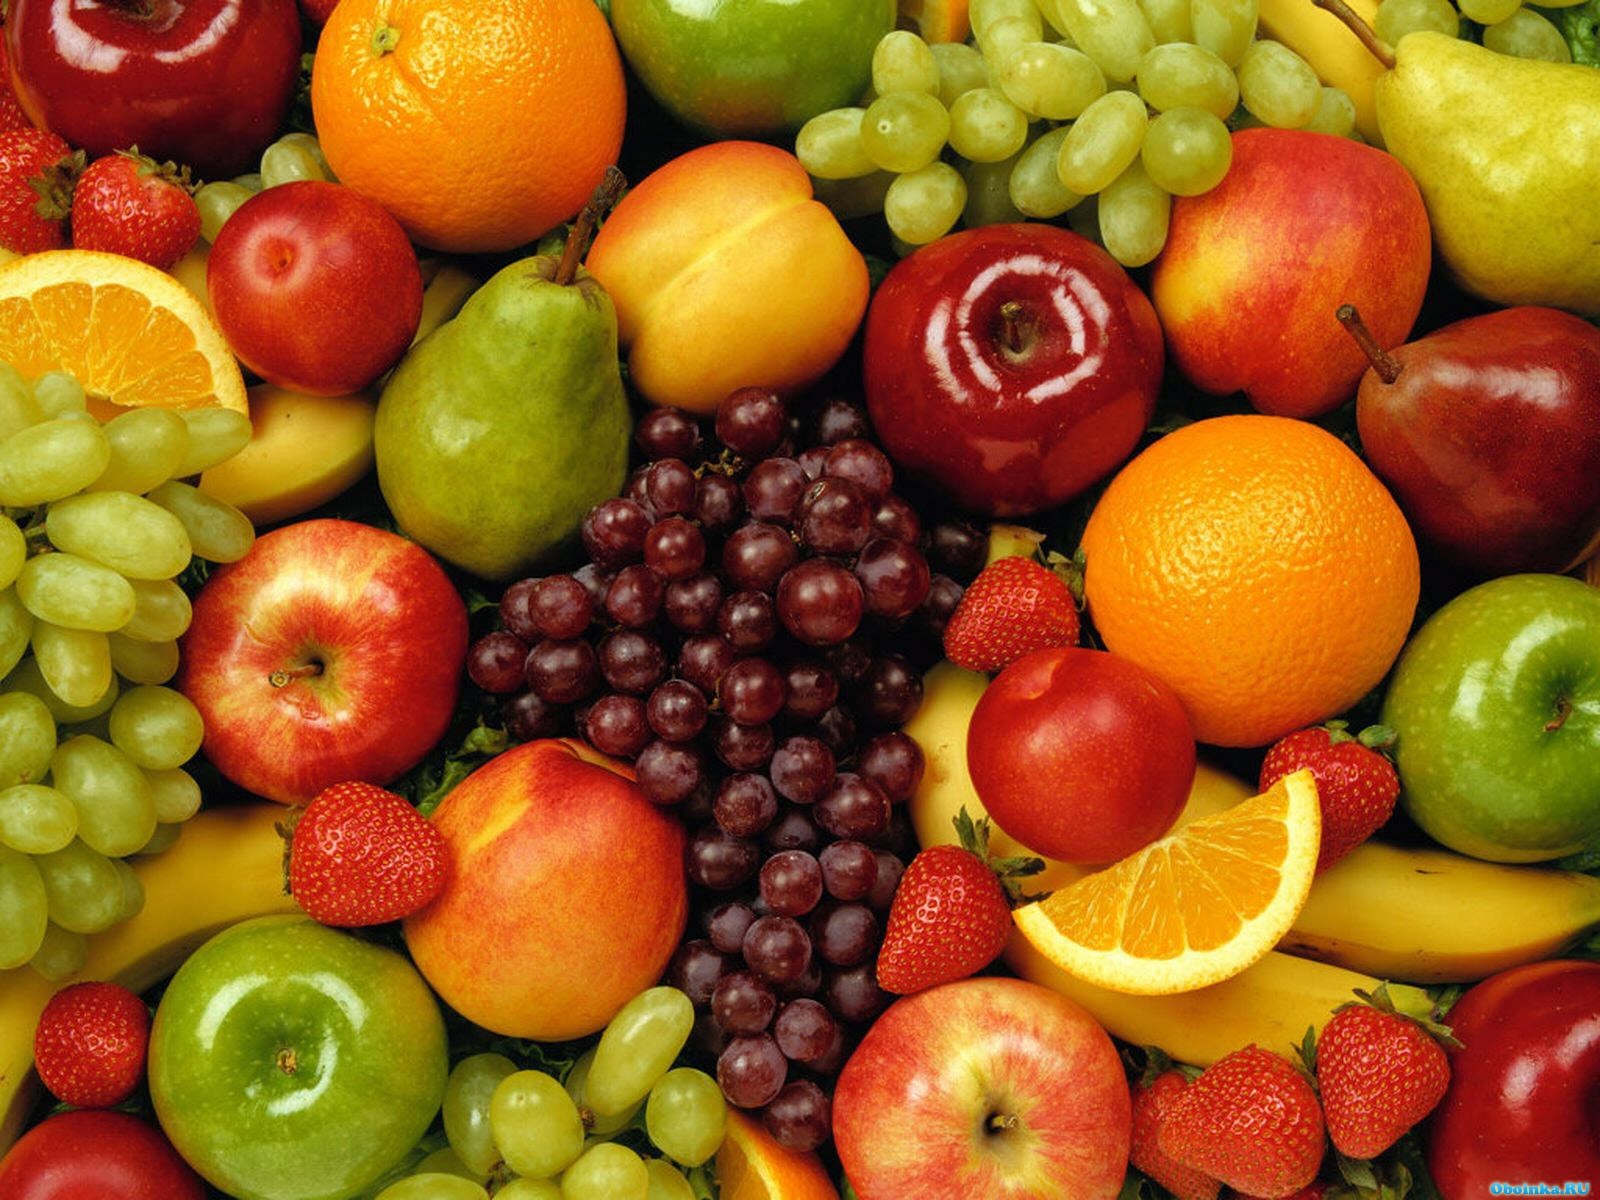 10144 download wallpaper fruits, food, background, berries screensavers and pictures for free